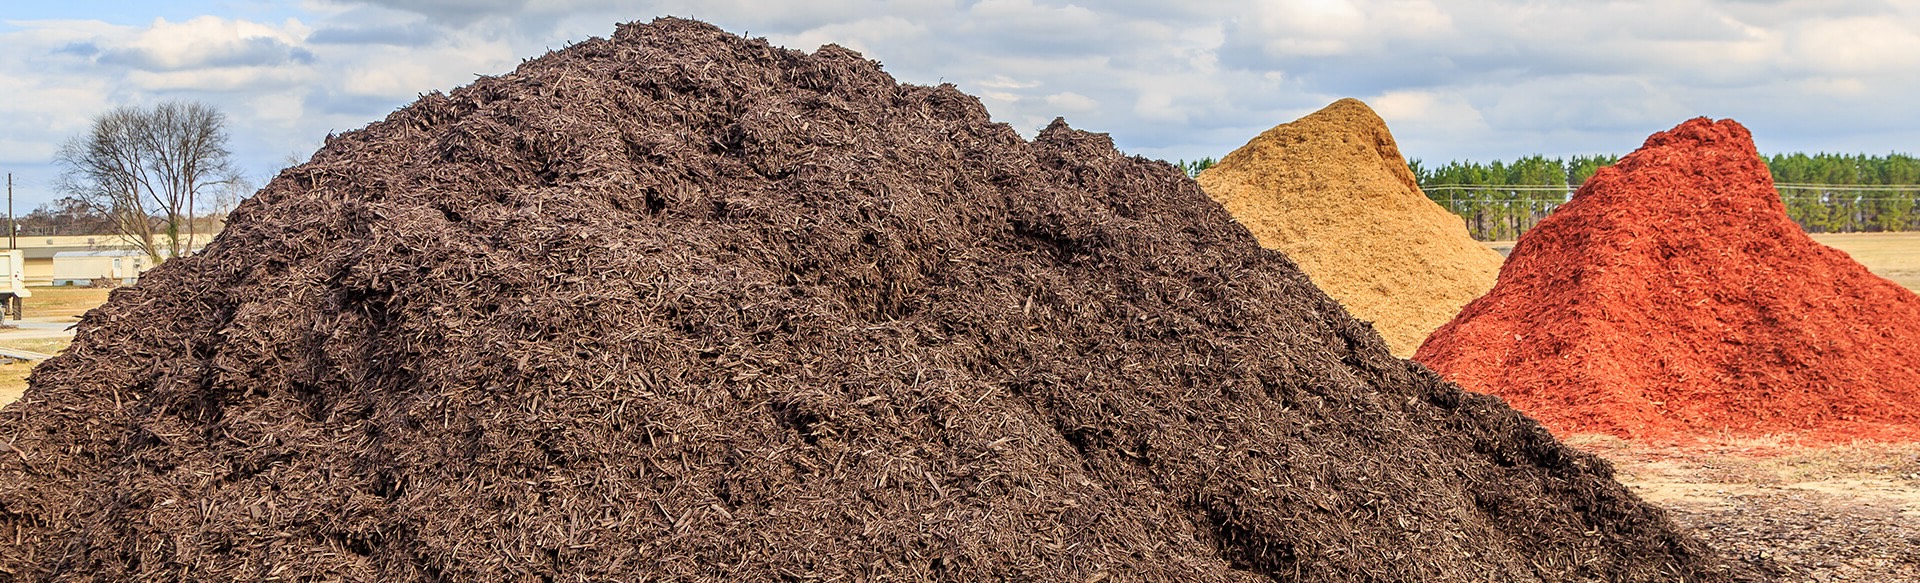 piles of different colored mulch